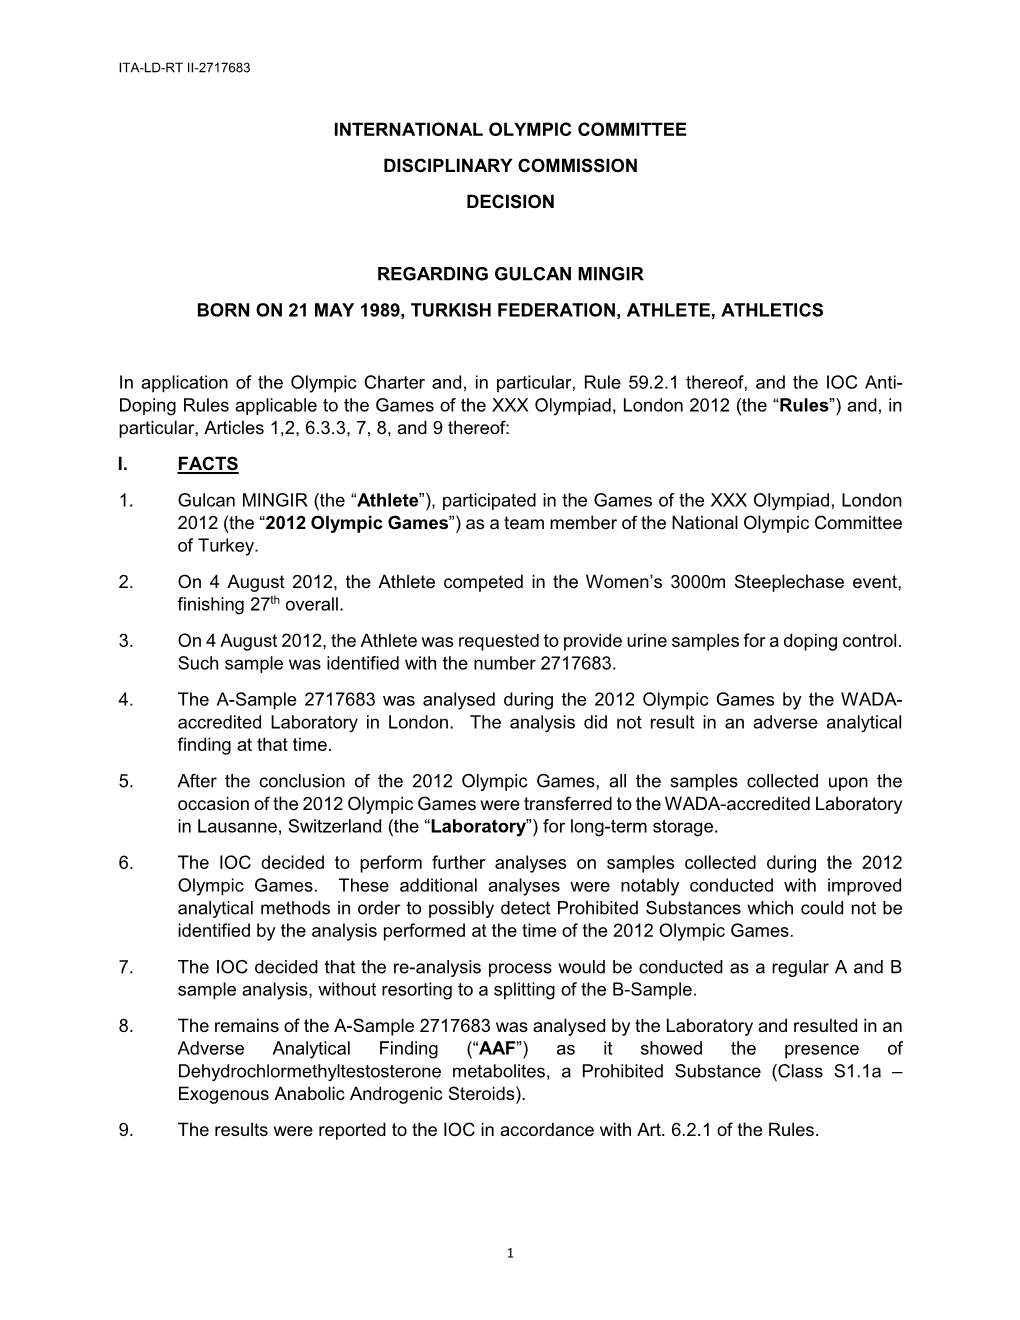 International Olympic Committee Disciplinary Commission Decision